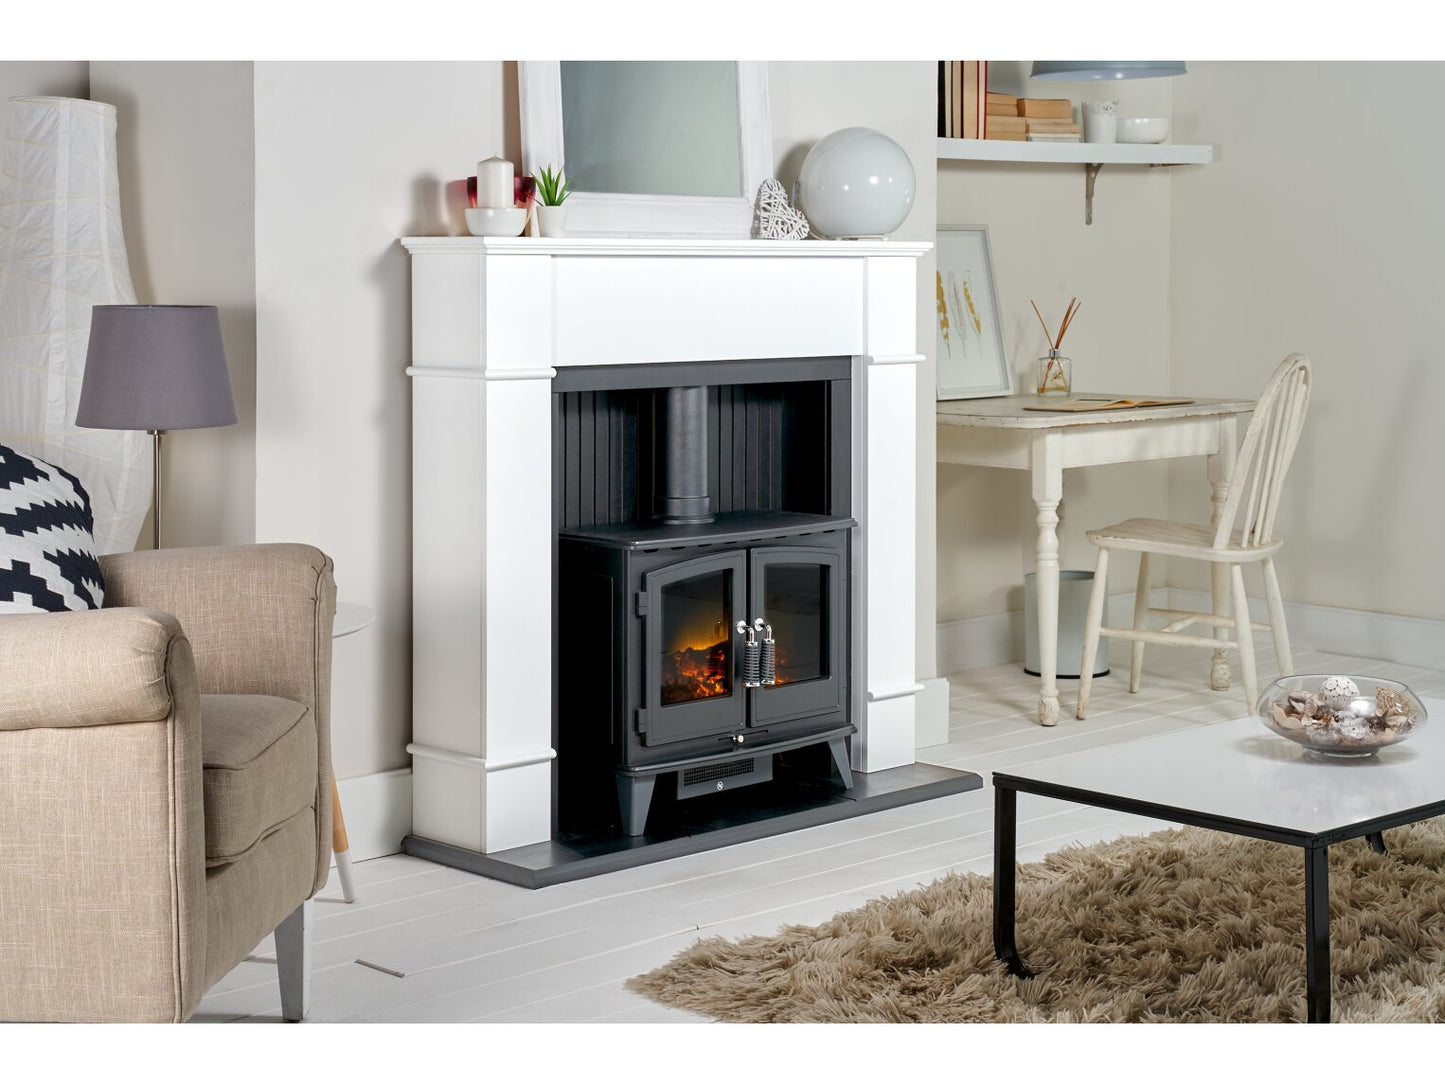 Adam Oxford Stove Fireplace with Woodhouse Electric Stove, 48 Inch 21503 Pure White